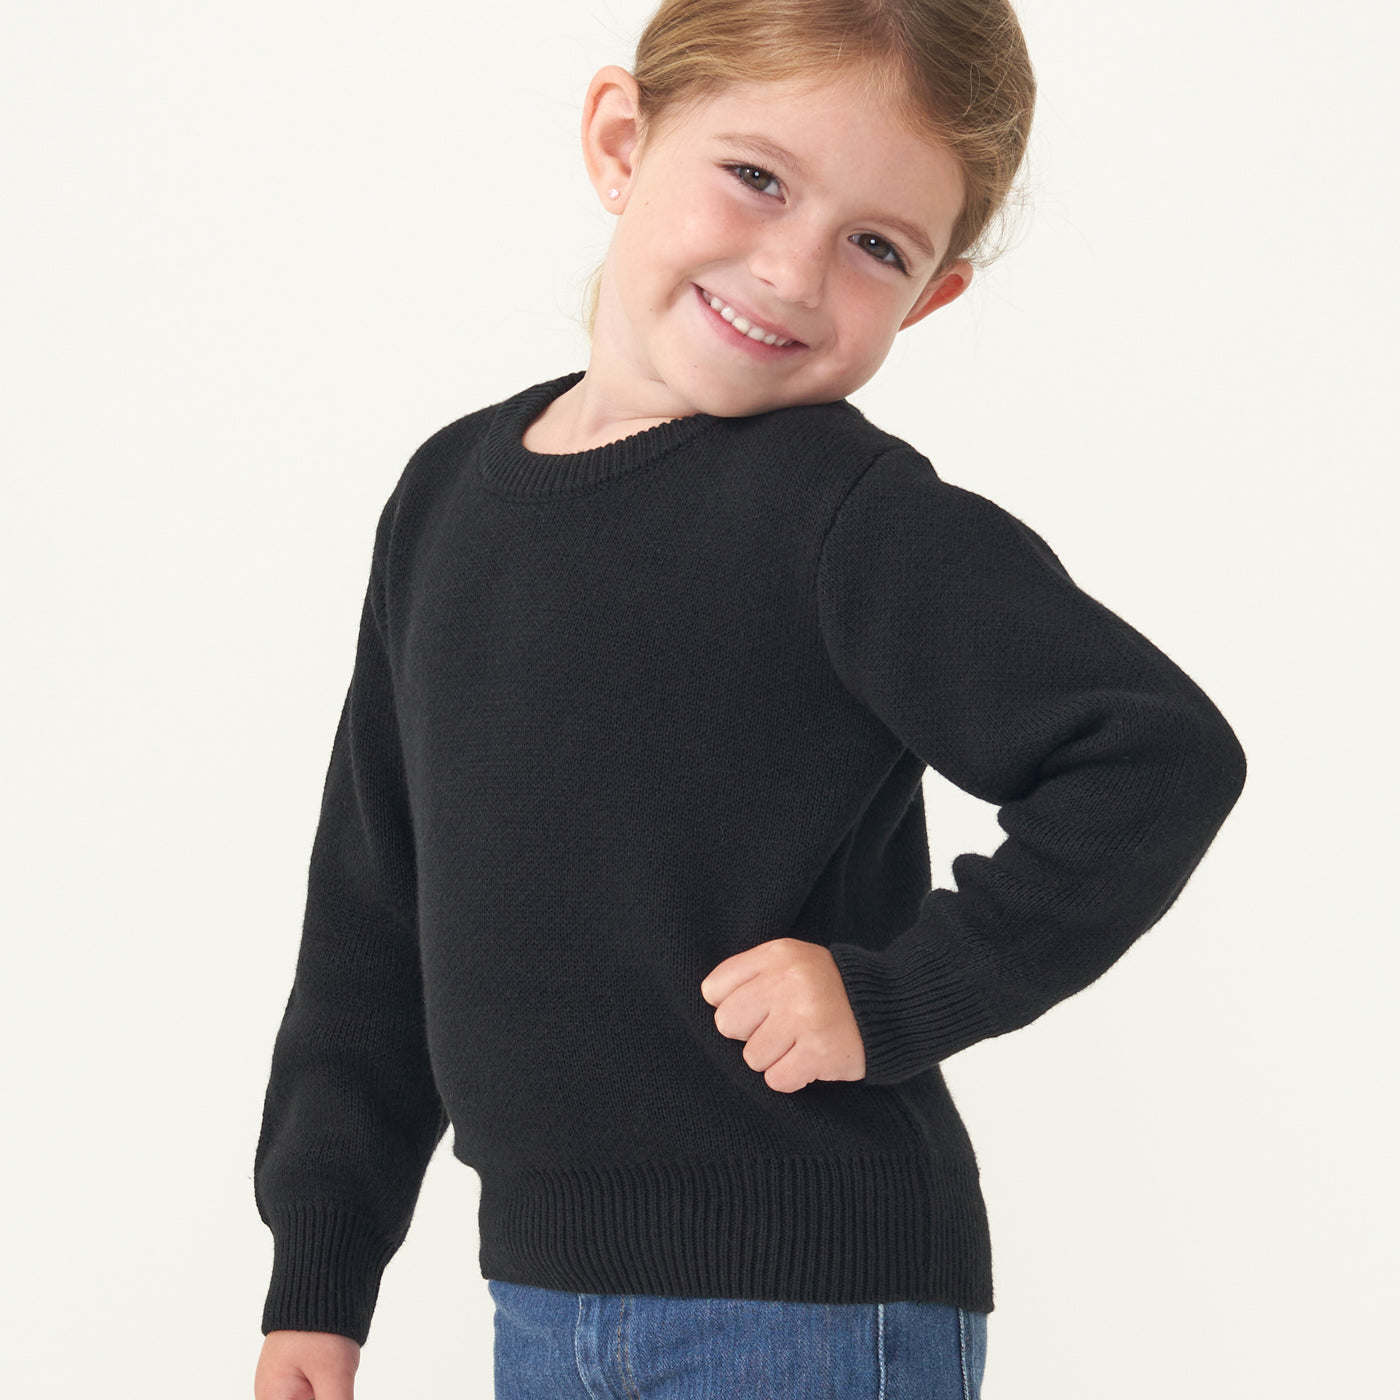 Child with her hand on her hip wearing a Black knit sweater